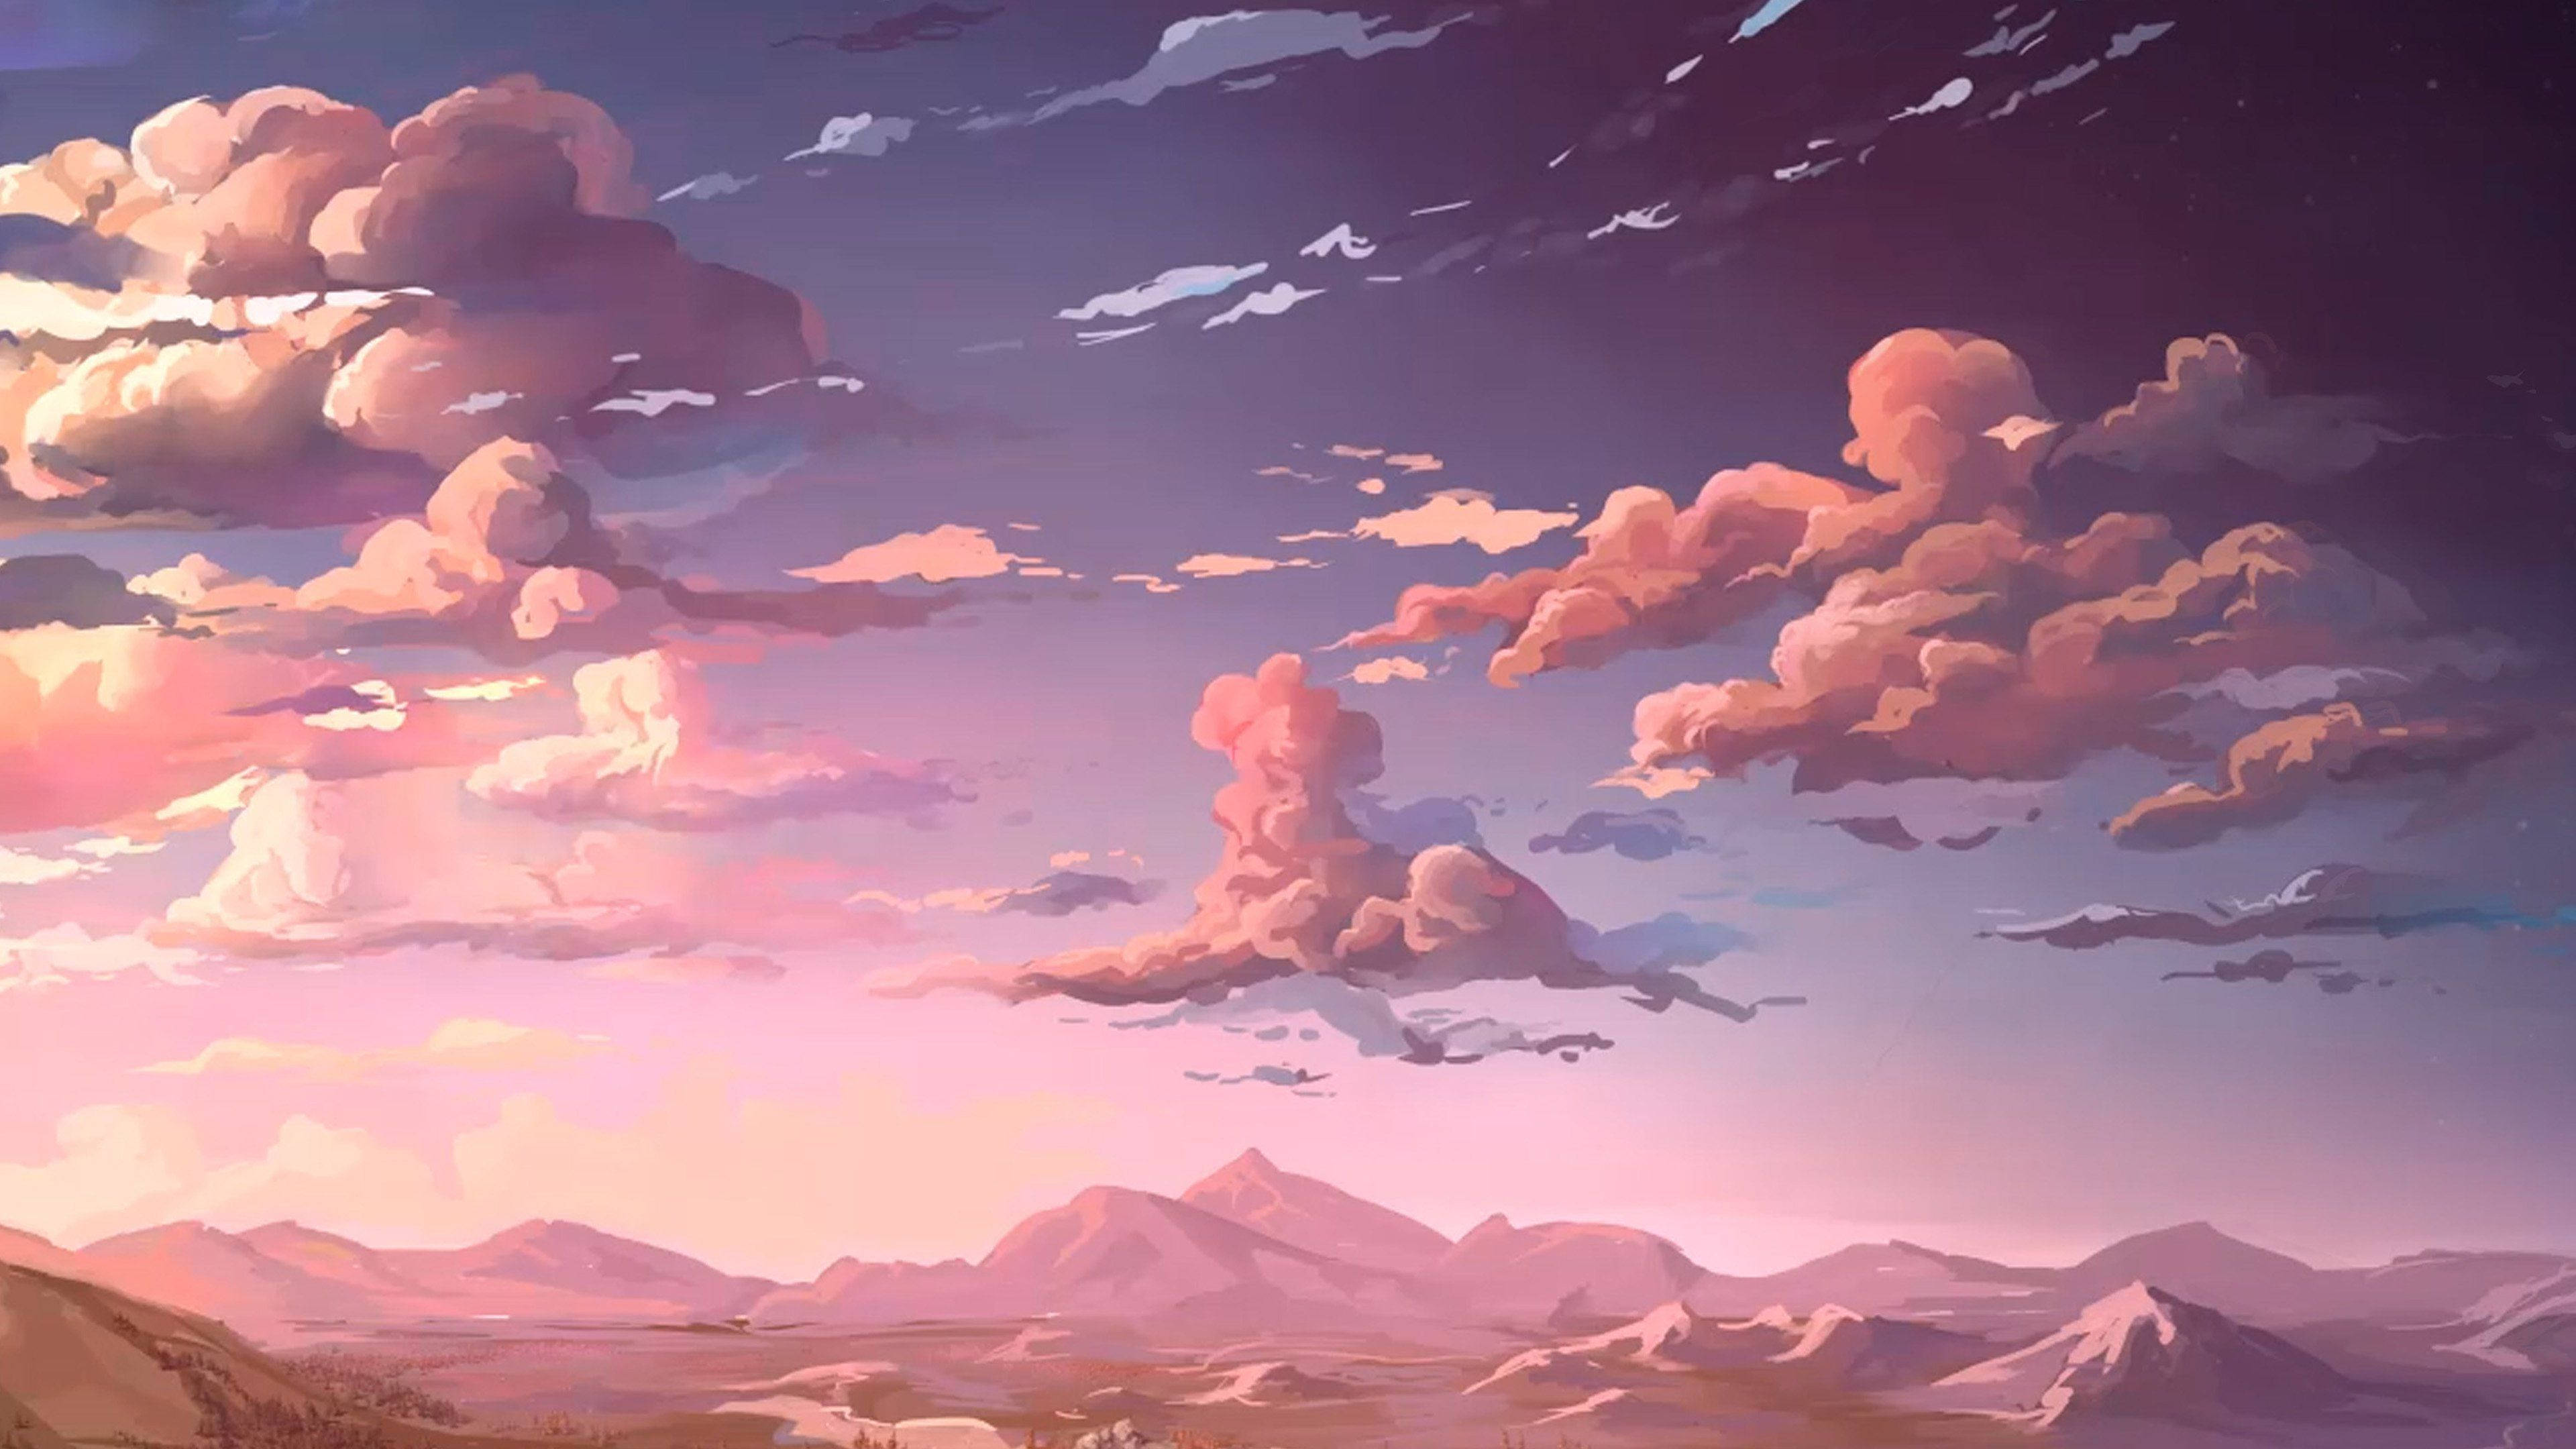 Download Anime Clouds And Mountains Aesthetic Mac Wallpaper 